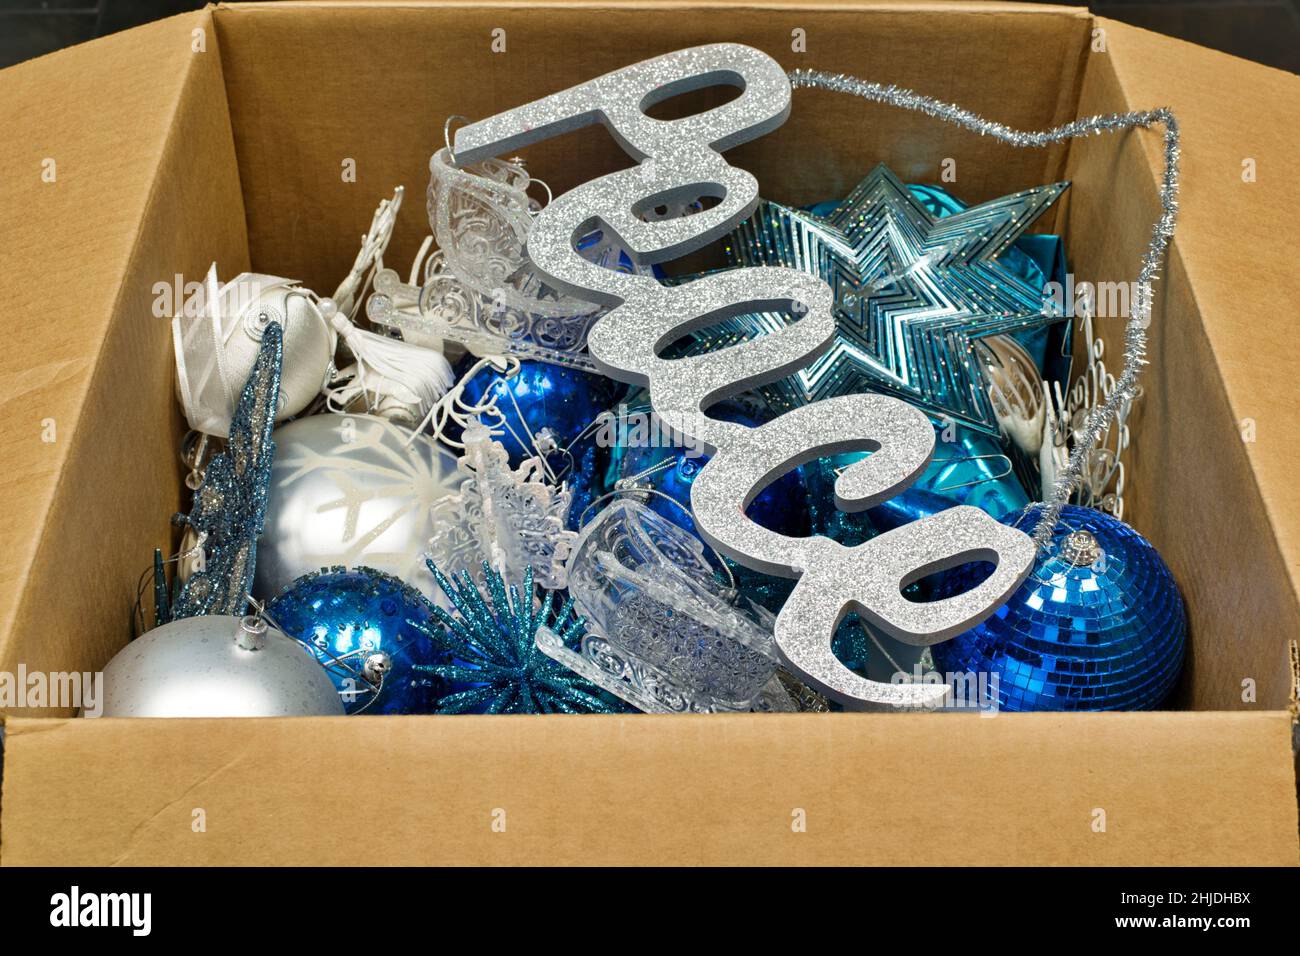 Christmas ornaments and a peace sign decoration in an open cardboard box packed away after the new year, low angle view. Stock Photo